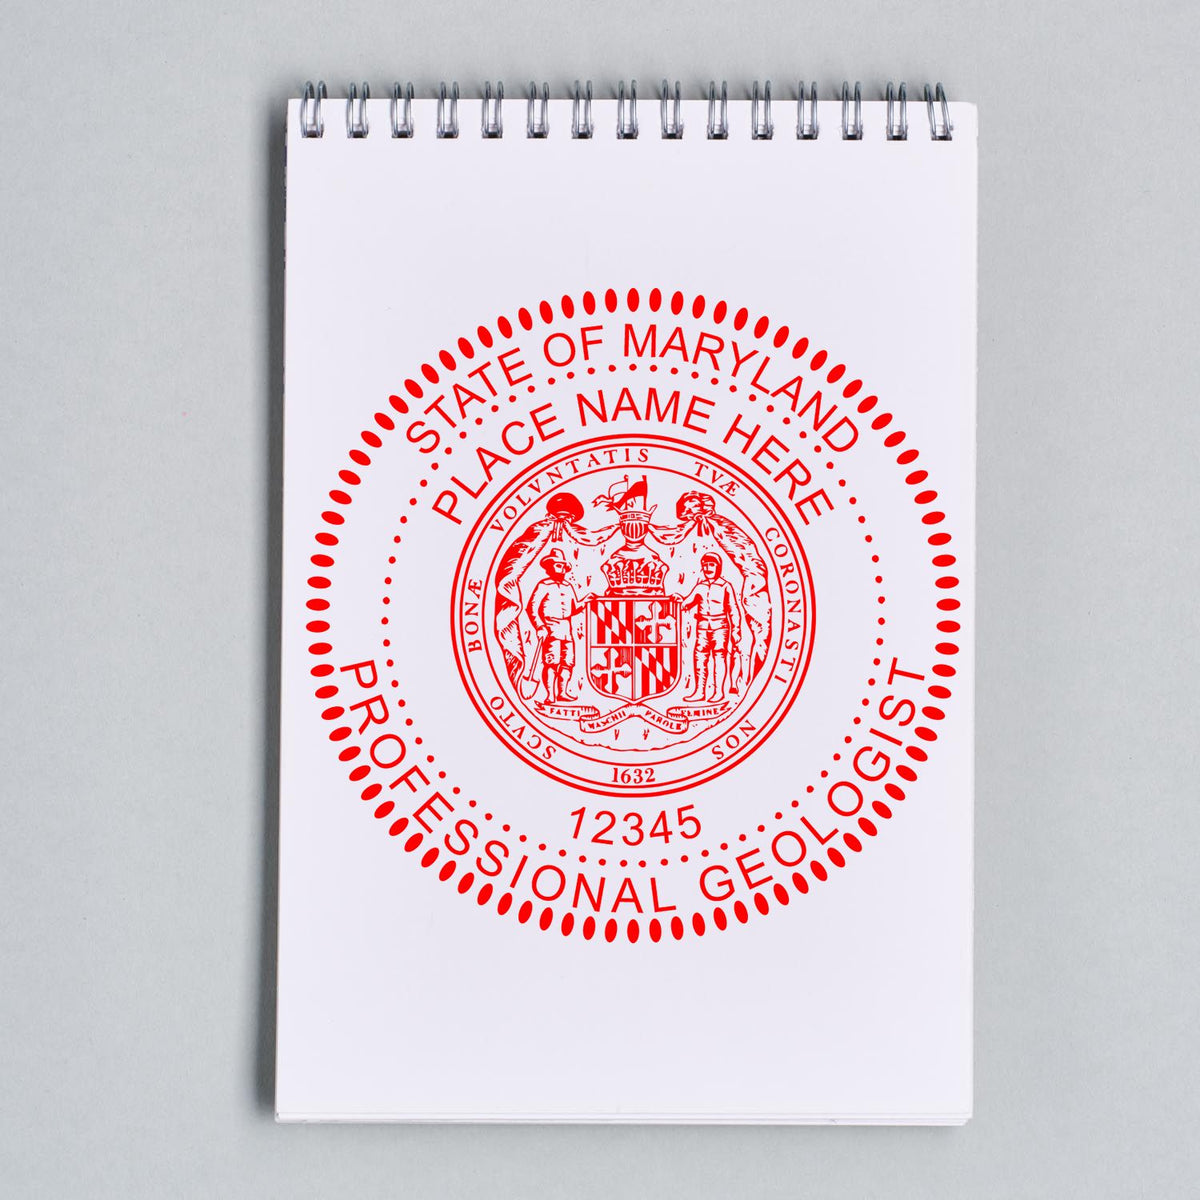 A stamped imprint of the Slim Pre-Inked Maryland Professional Geologist Seal Stamp in this stylish lifestyle photo, setting the tone for a unique and personalized product.